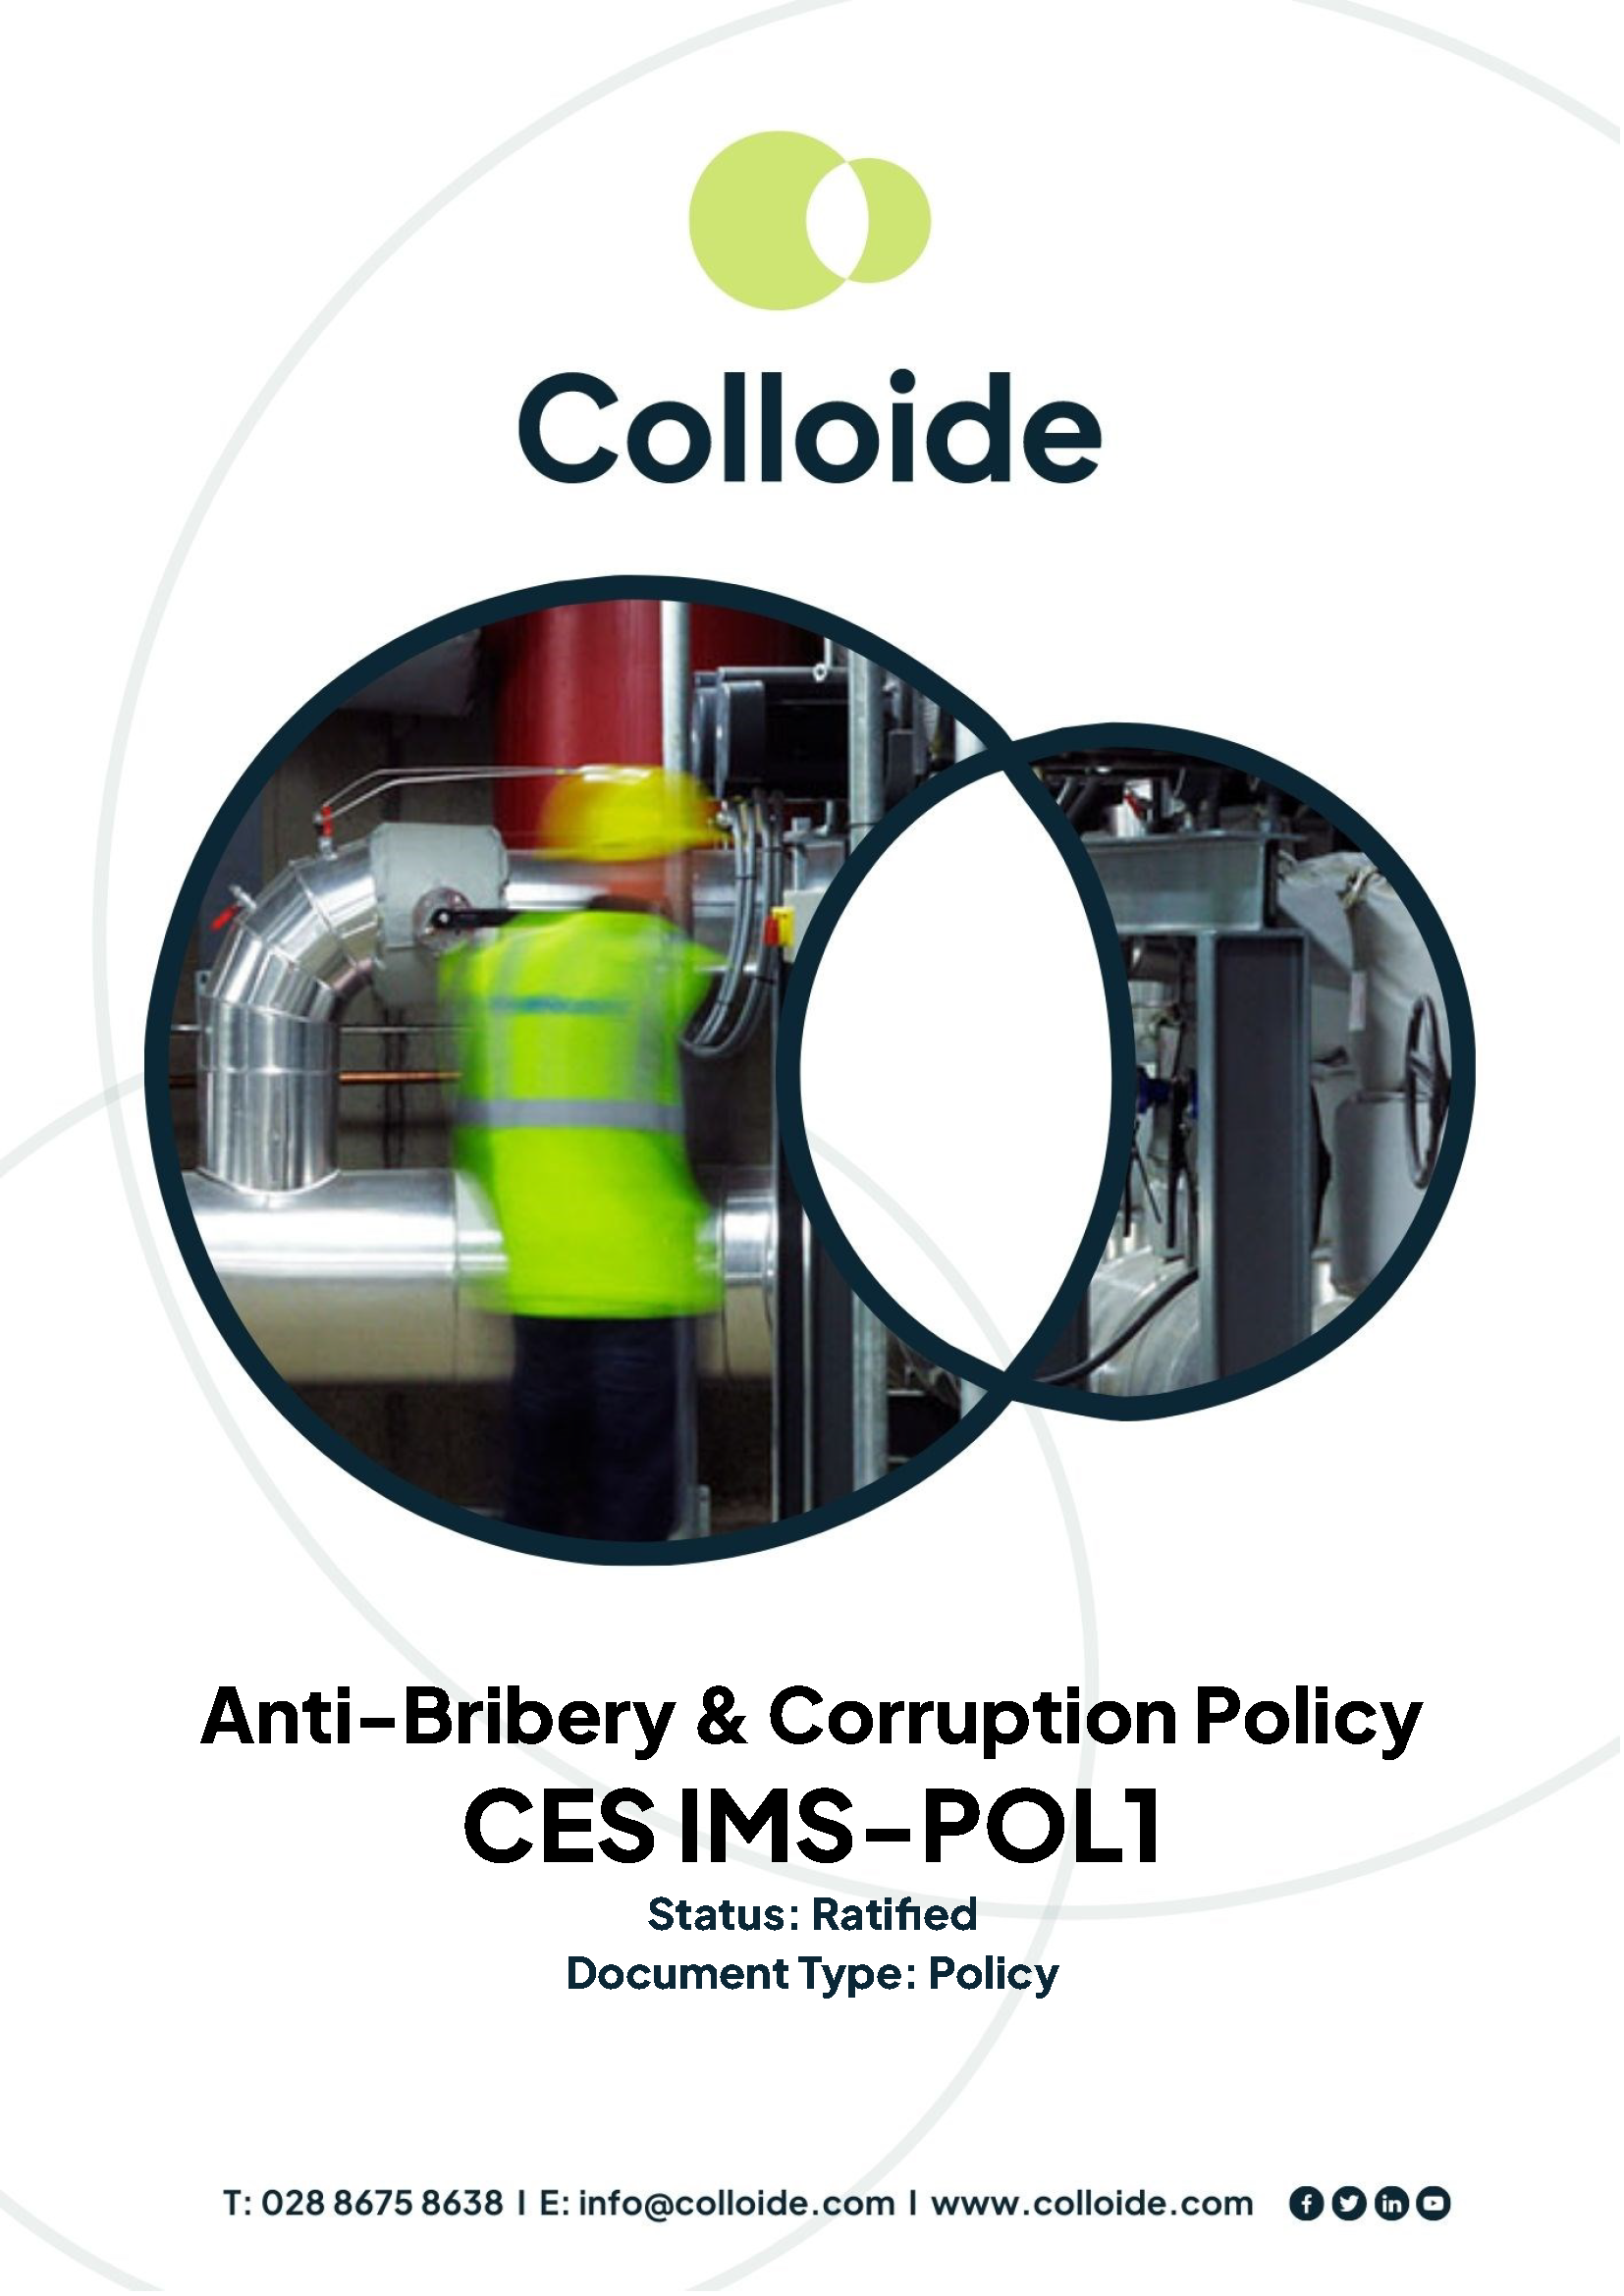 Cover Image for CES IMS-POL1 – Anti-Bribery & Corruption Policy